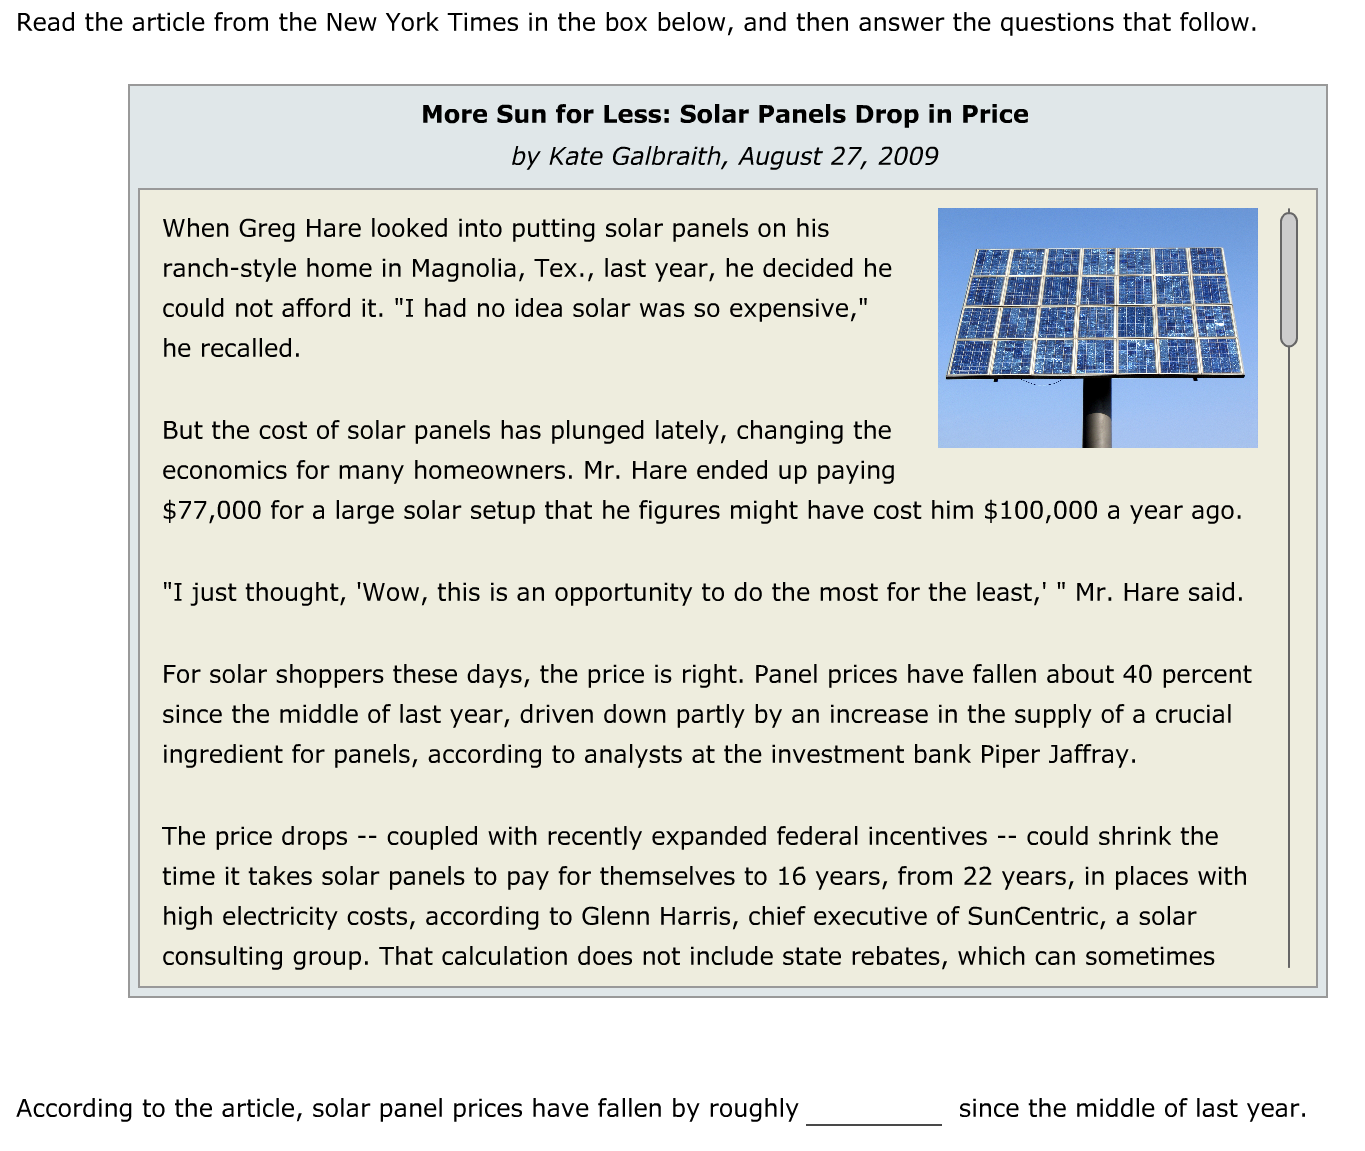 Read the article from the New York Times in the box below, and then answer the questions that follow.
More Sun for Less: Solar Panels Drop in Price
by Kate Galbraith, August 27, 2009
When Greg Hare looked into putting solar panels on his
ranch-style home in Magnolia, Tex., last year, he decided he
could not afford it. "I had no idea solar was so expensive,"
he recalled.
But the cost of solar panels has plunged lately, changing the
economics for many homeowners. Mr. Hare ended up paying
$77,000 for a large solar setup that he figures might have cost him $100,000 a year ago.
"I just thought, 'Wow, this is an opportunity to do the most for the least,' " Mr. Hare said.
For solar shoppers these days, the price is right. Panel prices have fallen about 40 percent
since the middle of last year, driven down partly by an increase in the supply of a crucial
ingredient for panels, according to analysts at the investment bank Piper Jaffray.
The price drops -- coupled with recently expanded federal incentives
could shrink the
--
time it takes solar panels to pay for themselves to 16 years, from 22 years, in places with
high electricity costs, according to Glenn Harris, chief executive of SunCentric, a solar
consulting group. That calculation does not include state rebates, which can sometimes
According to the article, solar panel prices have fallen by roughly
since the middle of last year.
